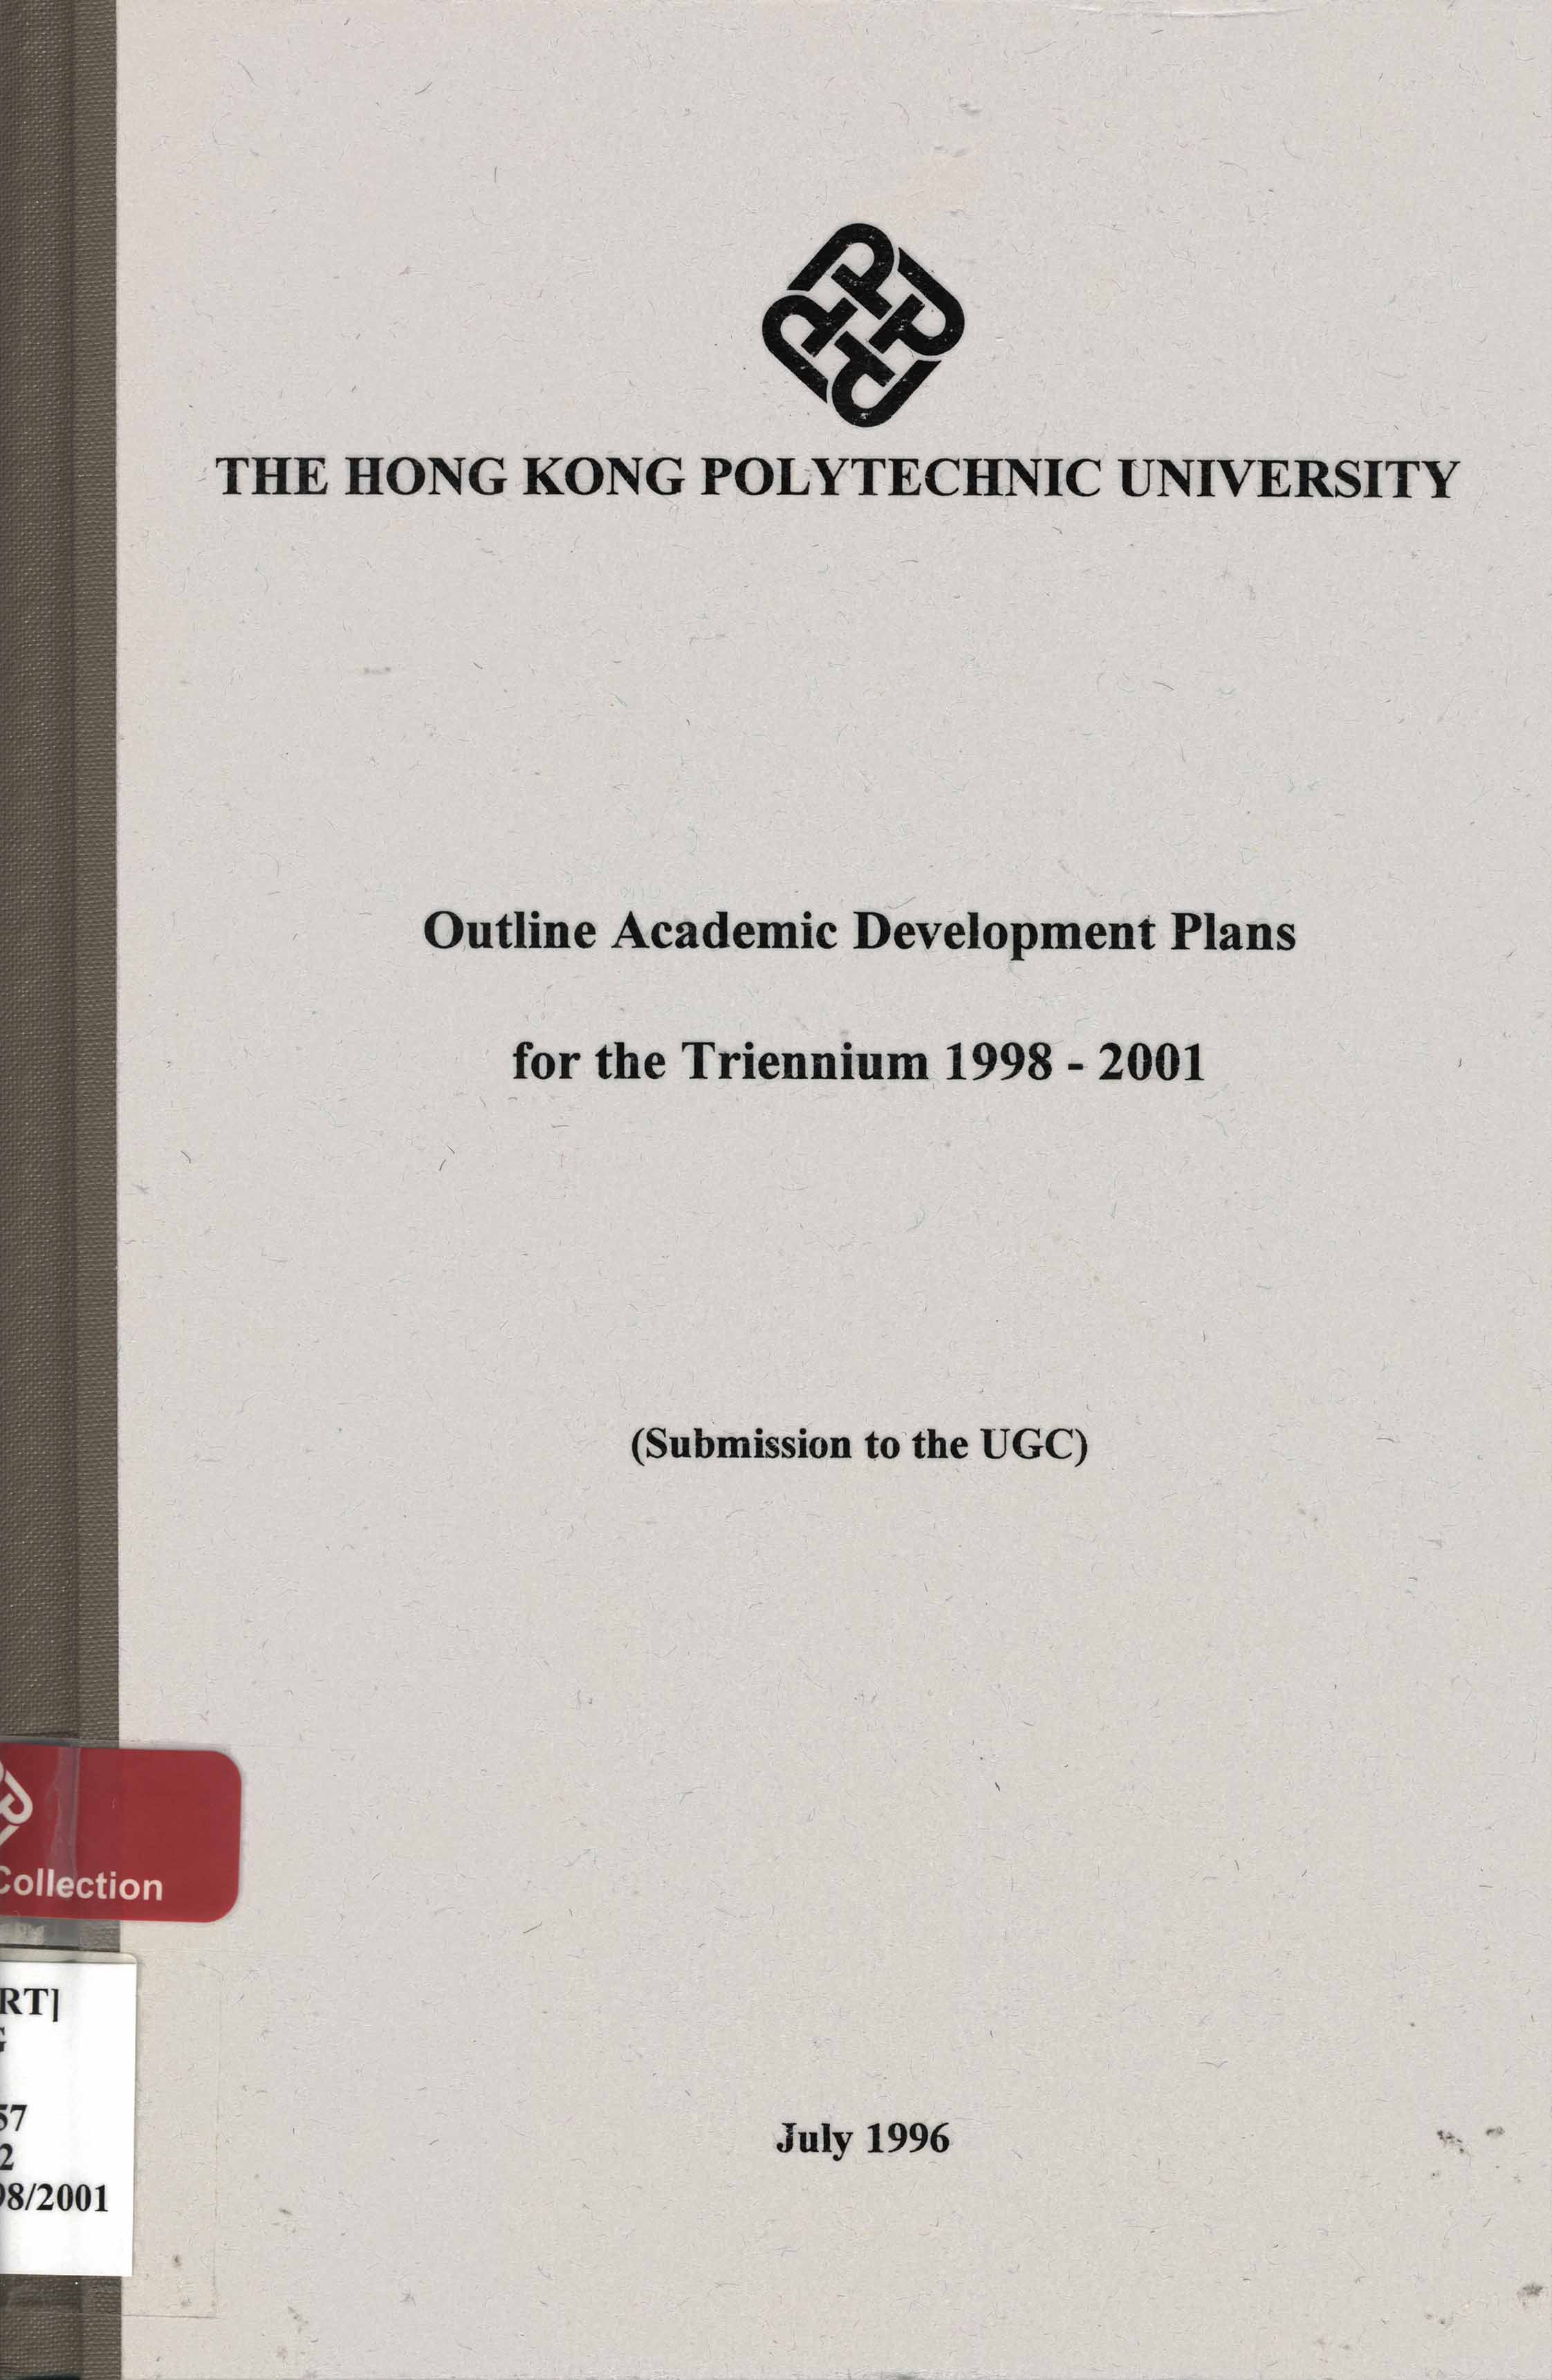 Outline Academic Development Plans for the Triennium 1998-2001 (Submission to the UGC)